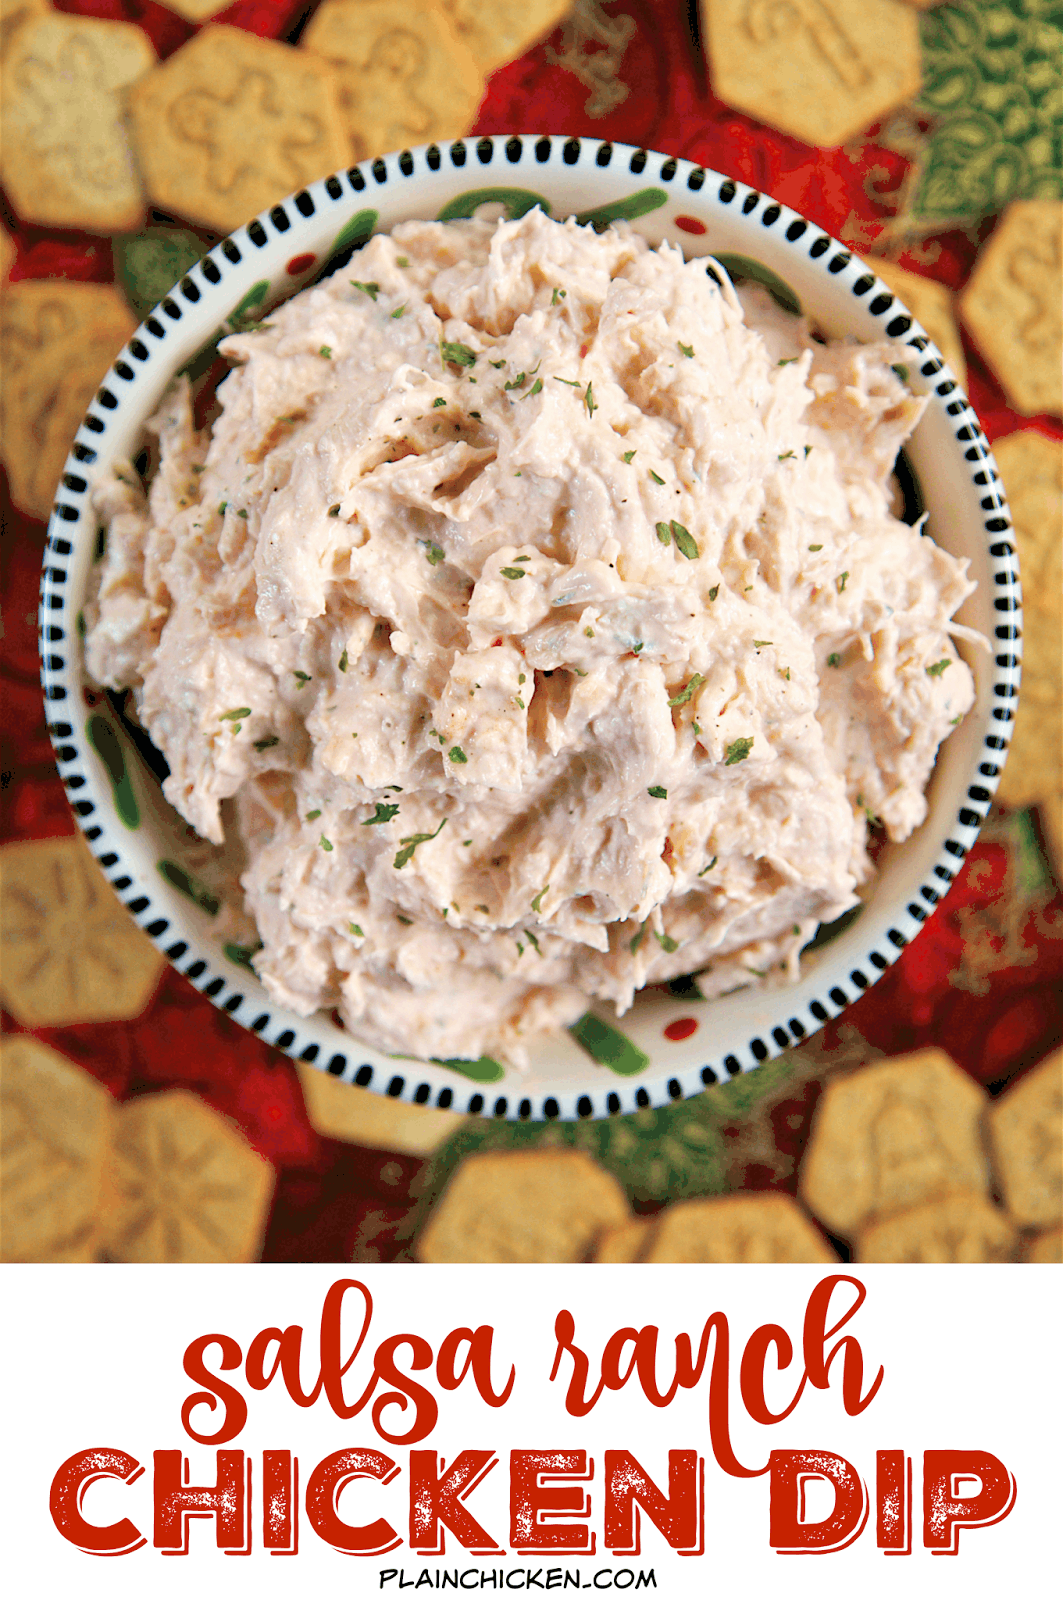 Salsa Ranch Chicken Dip - only 4 ingredients! You probably have everything in your pantry right now to whip up the delicious dip! Literally takes one minute to make. We serve it with wheat thins and veggies. Great for parties!